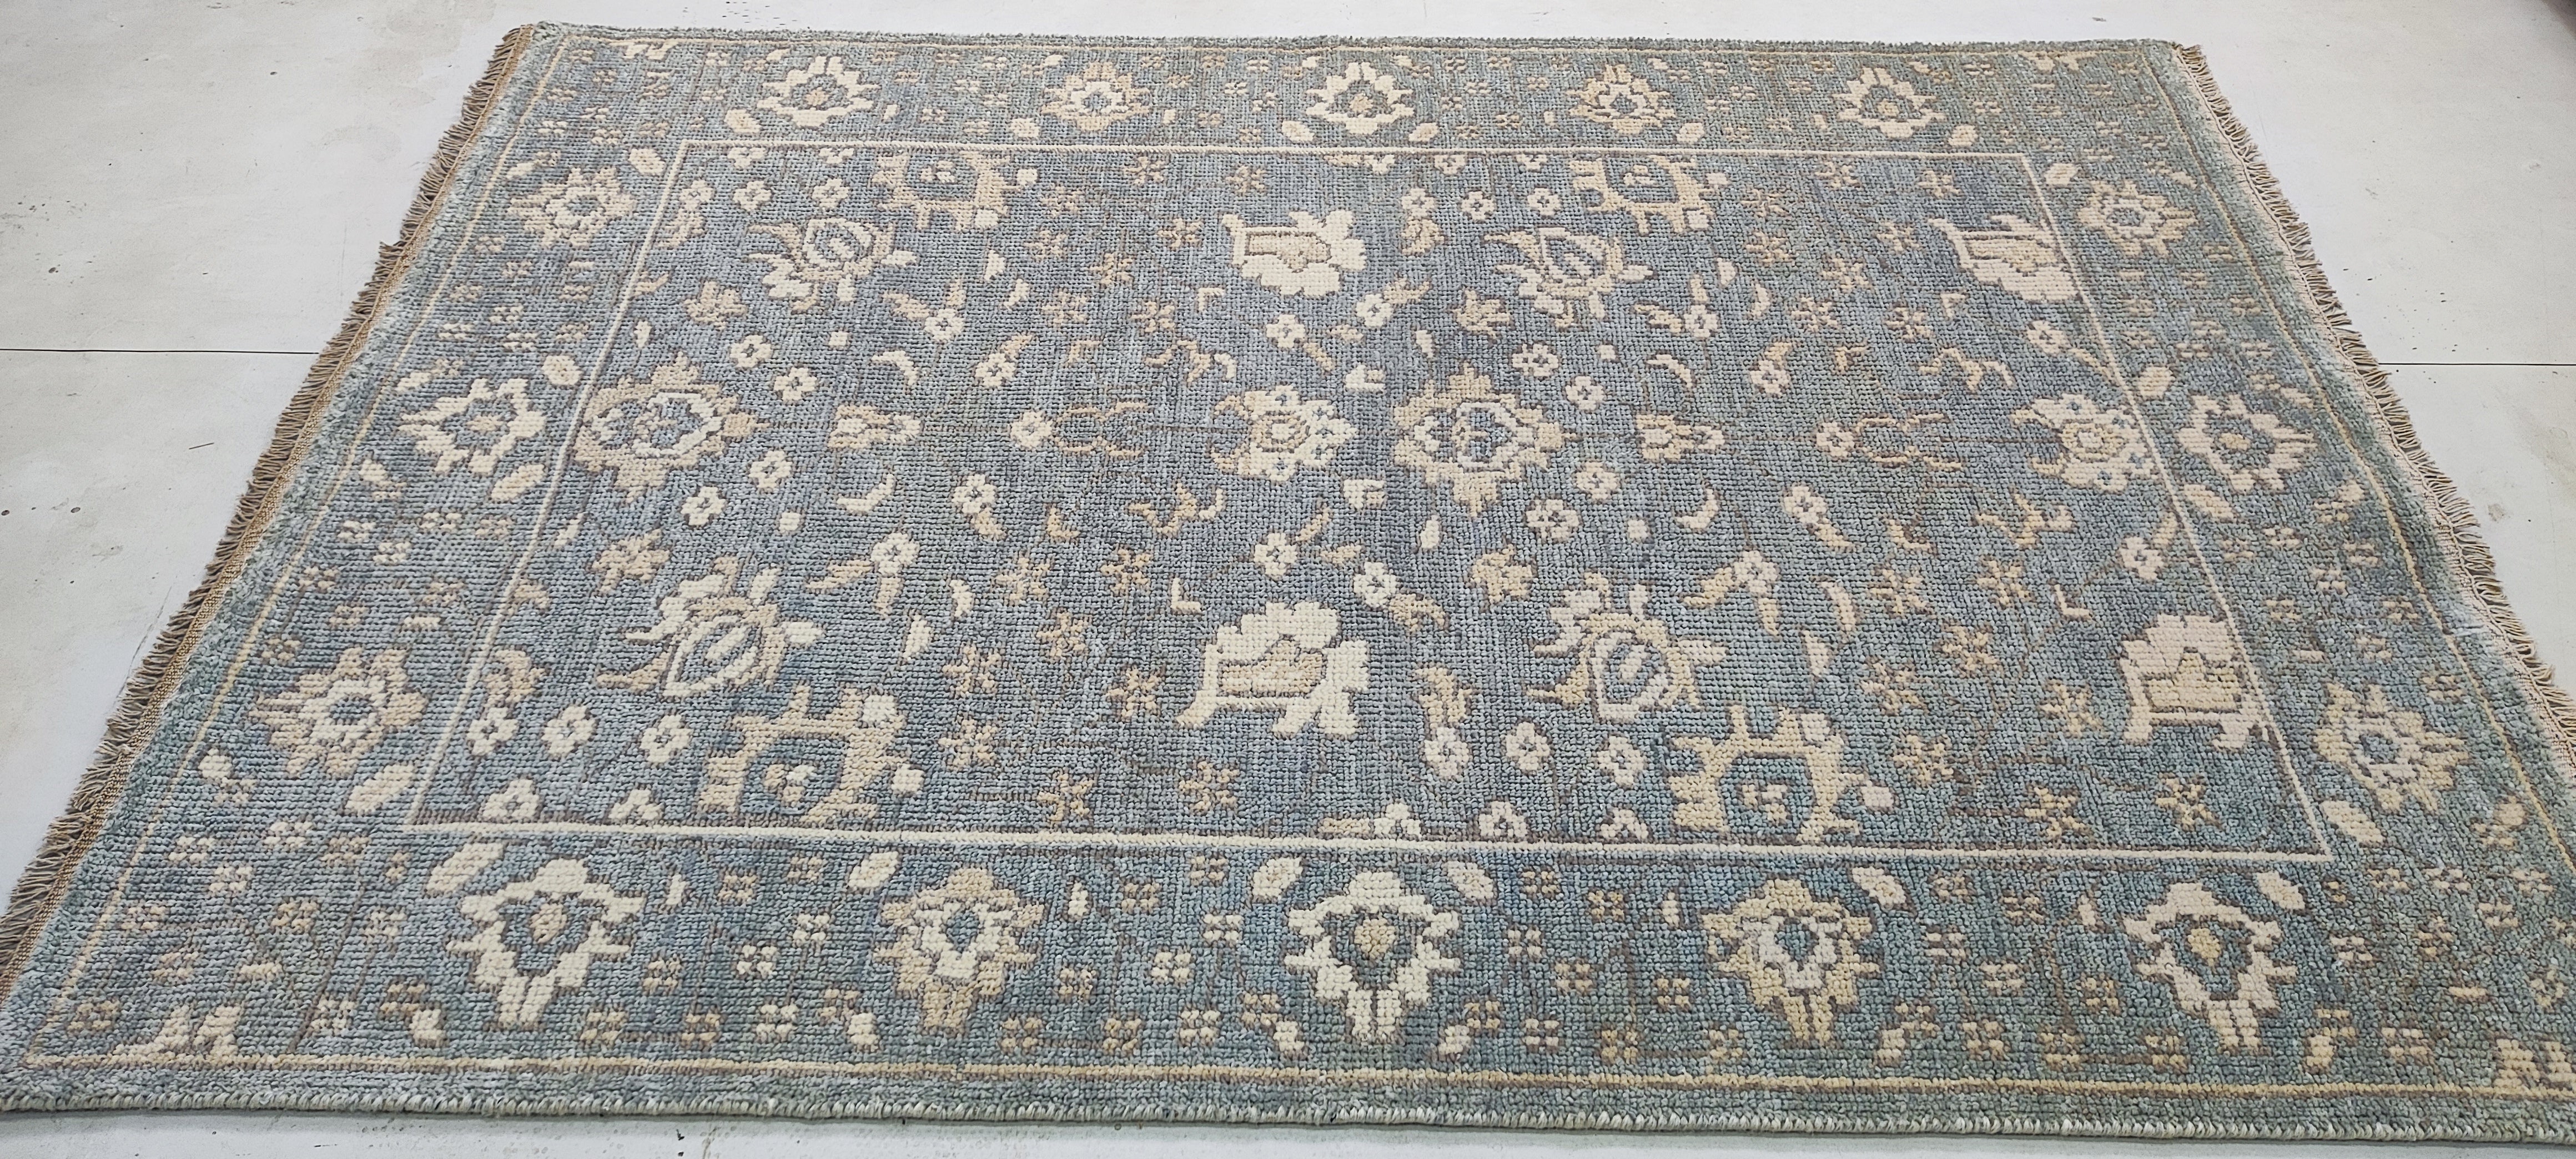 Kim Richards 4.3x6 Hand-Knotted Oushak Blue and Cream